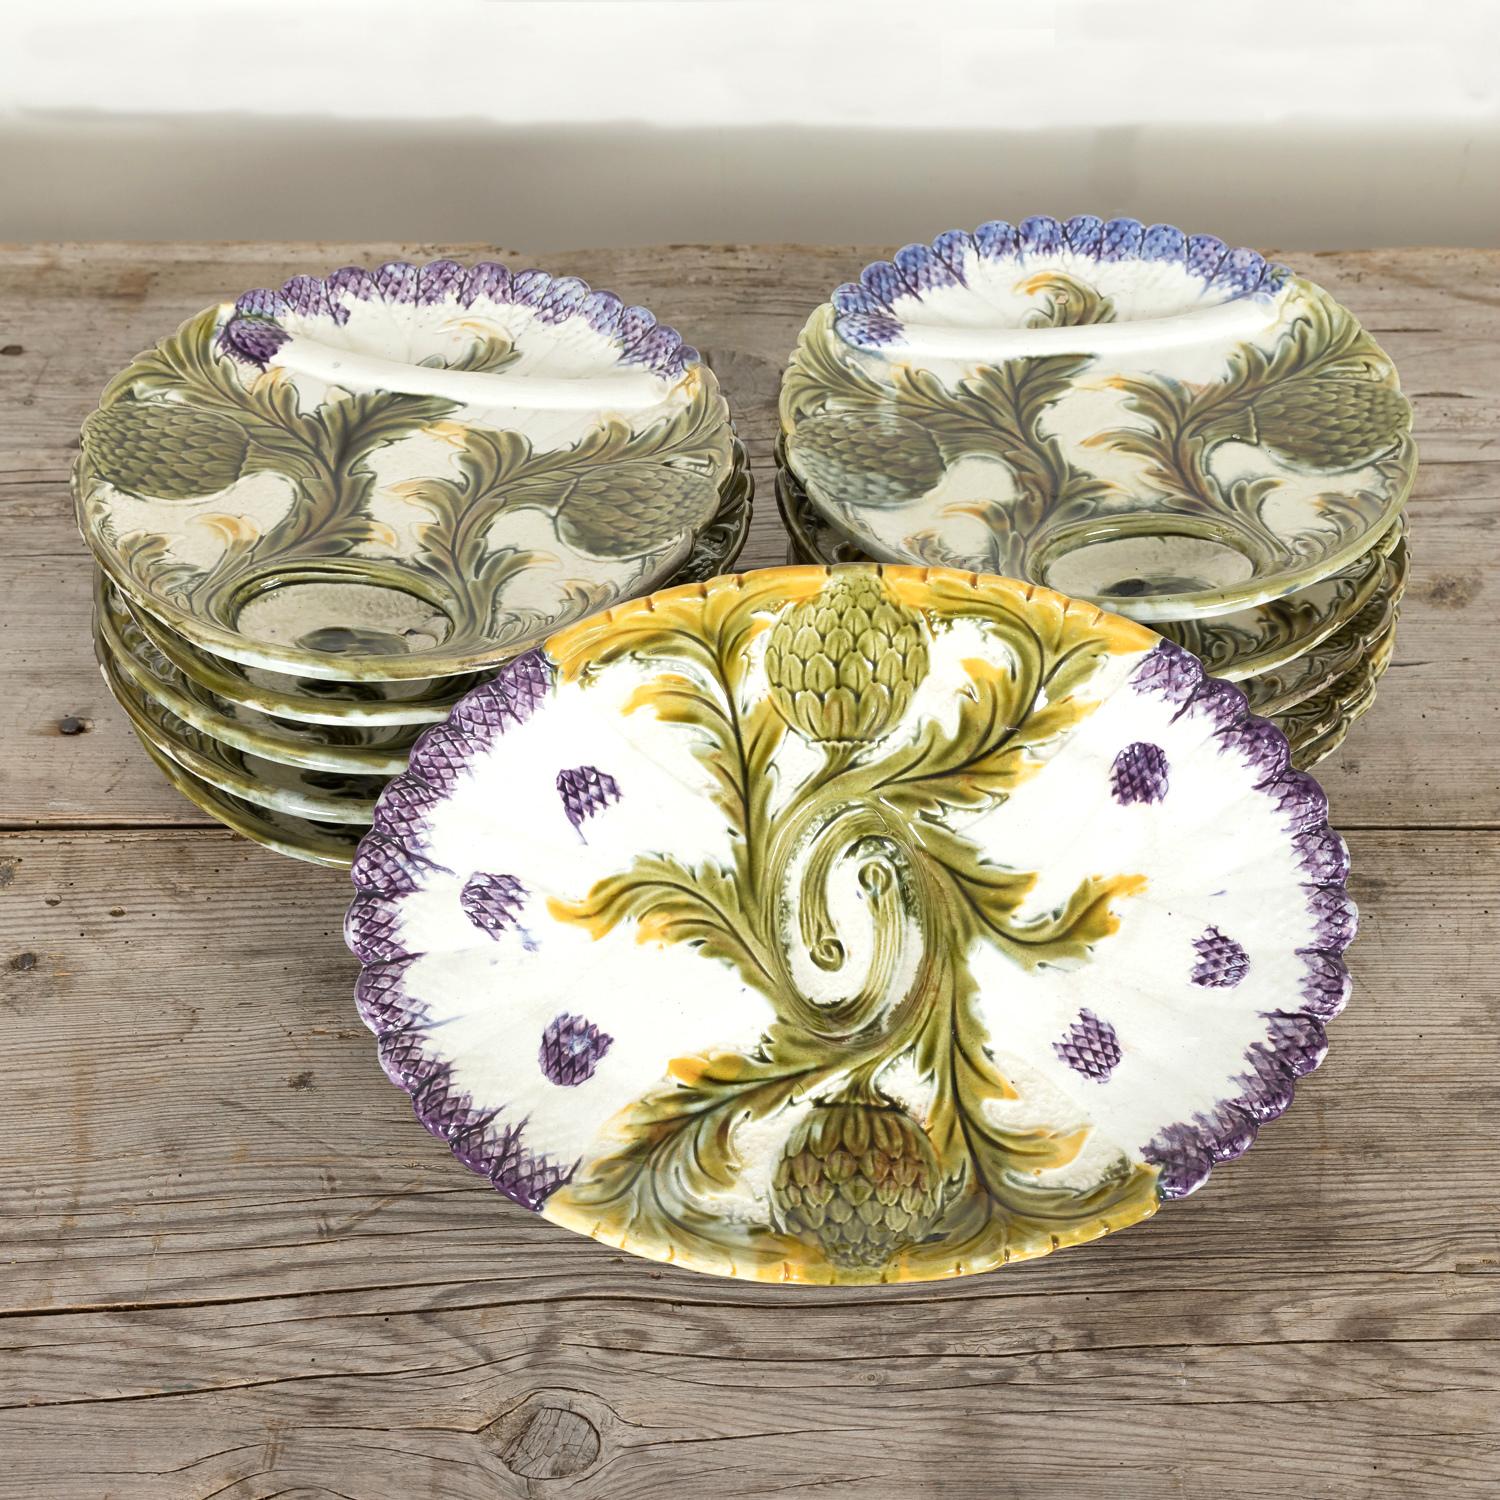 A rare and exceptional 19th century set of 10 majolica glazed French faïence barbotine artichoke and asparagus plates complete with oval shaped master server or platter by Orchies, circa 1880s. In the Art Nouveau style, this individually molded,